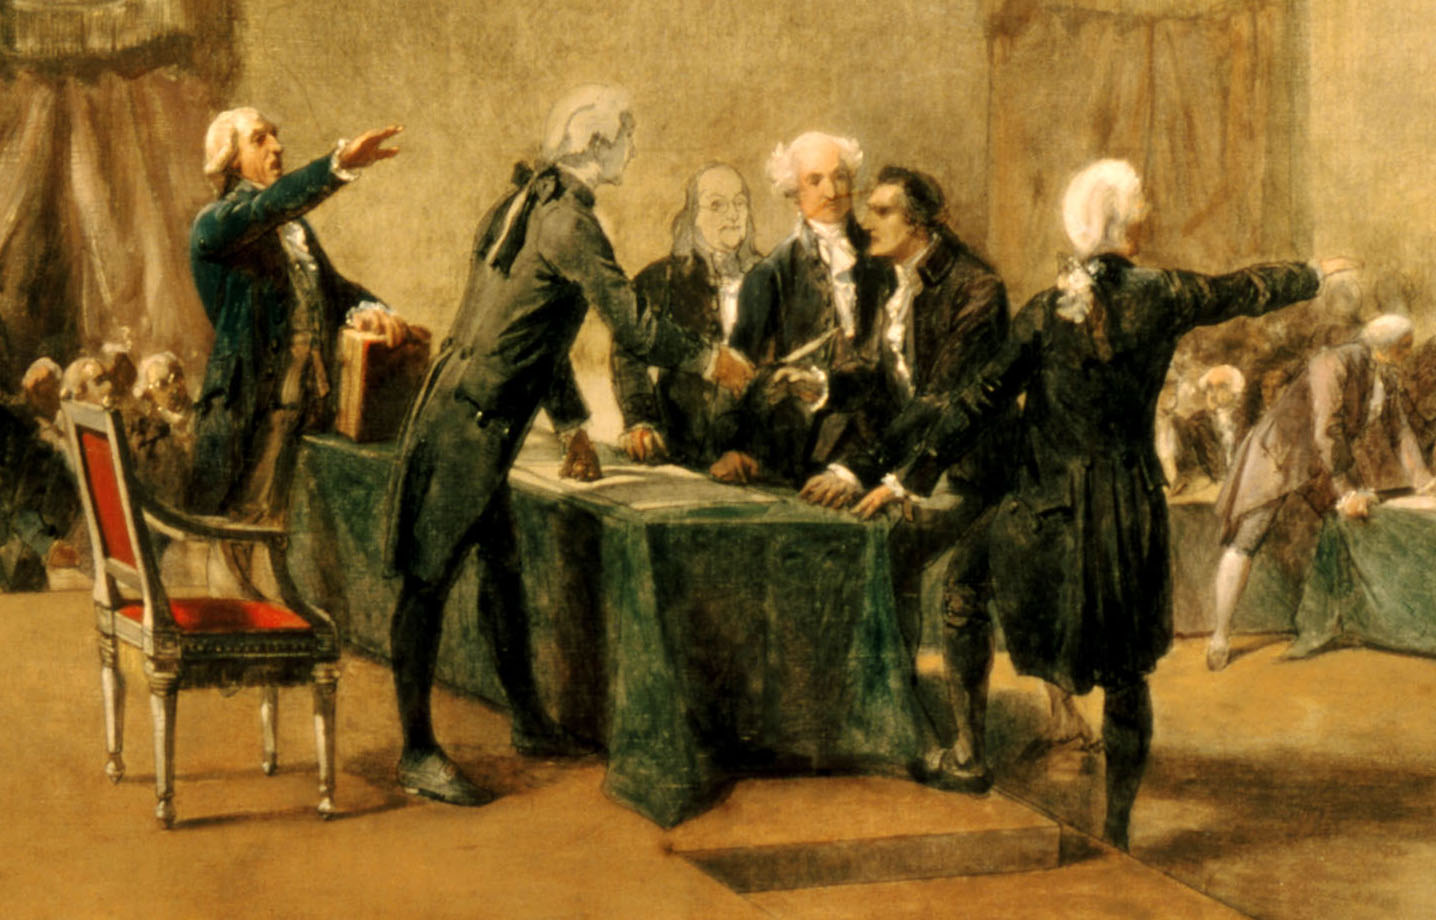 Signing_of_Declaration_of_Independence_by_Armand-Dumaresq,_c1873_-_restored